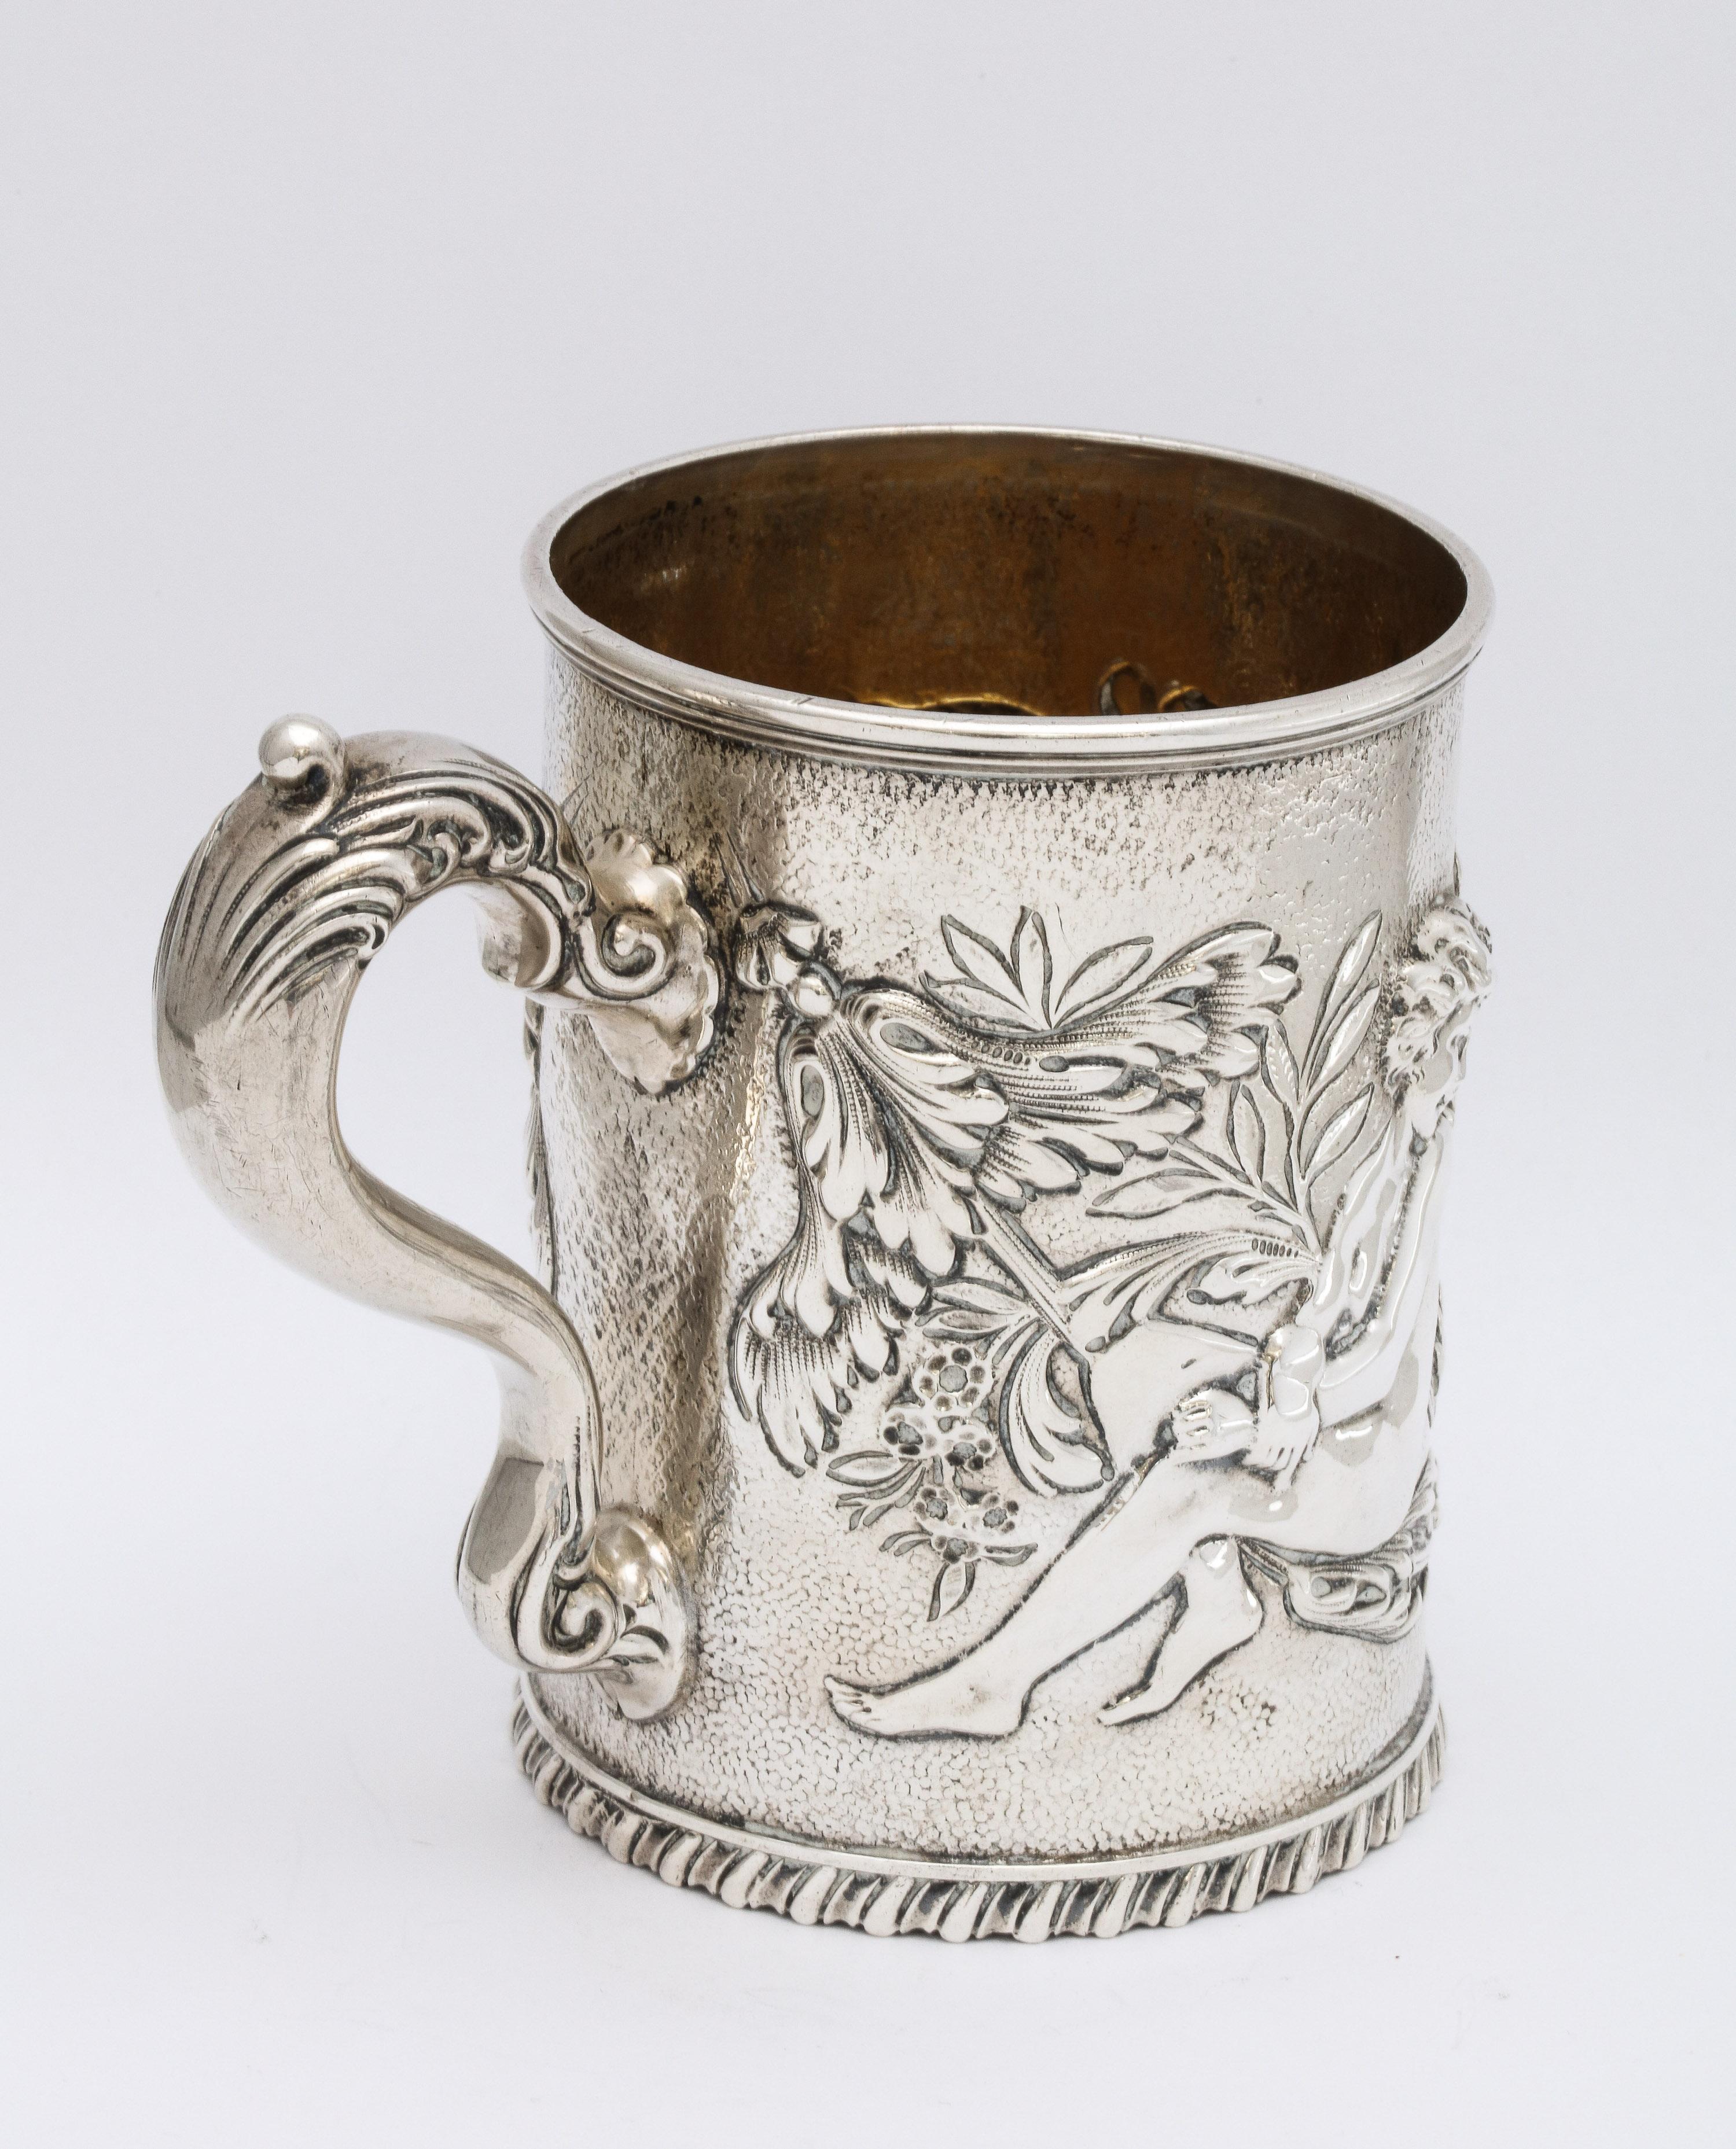 Neoclassical Sterling Silver Mug/Cup by The Whiting Mfg. Co. For Sale 3